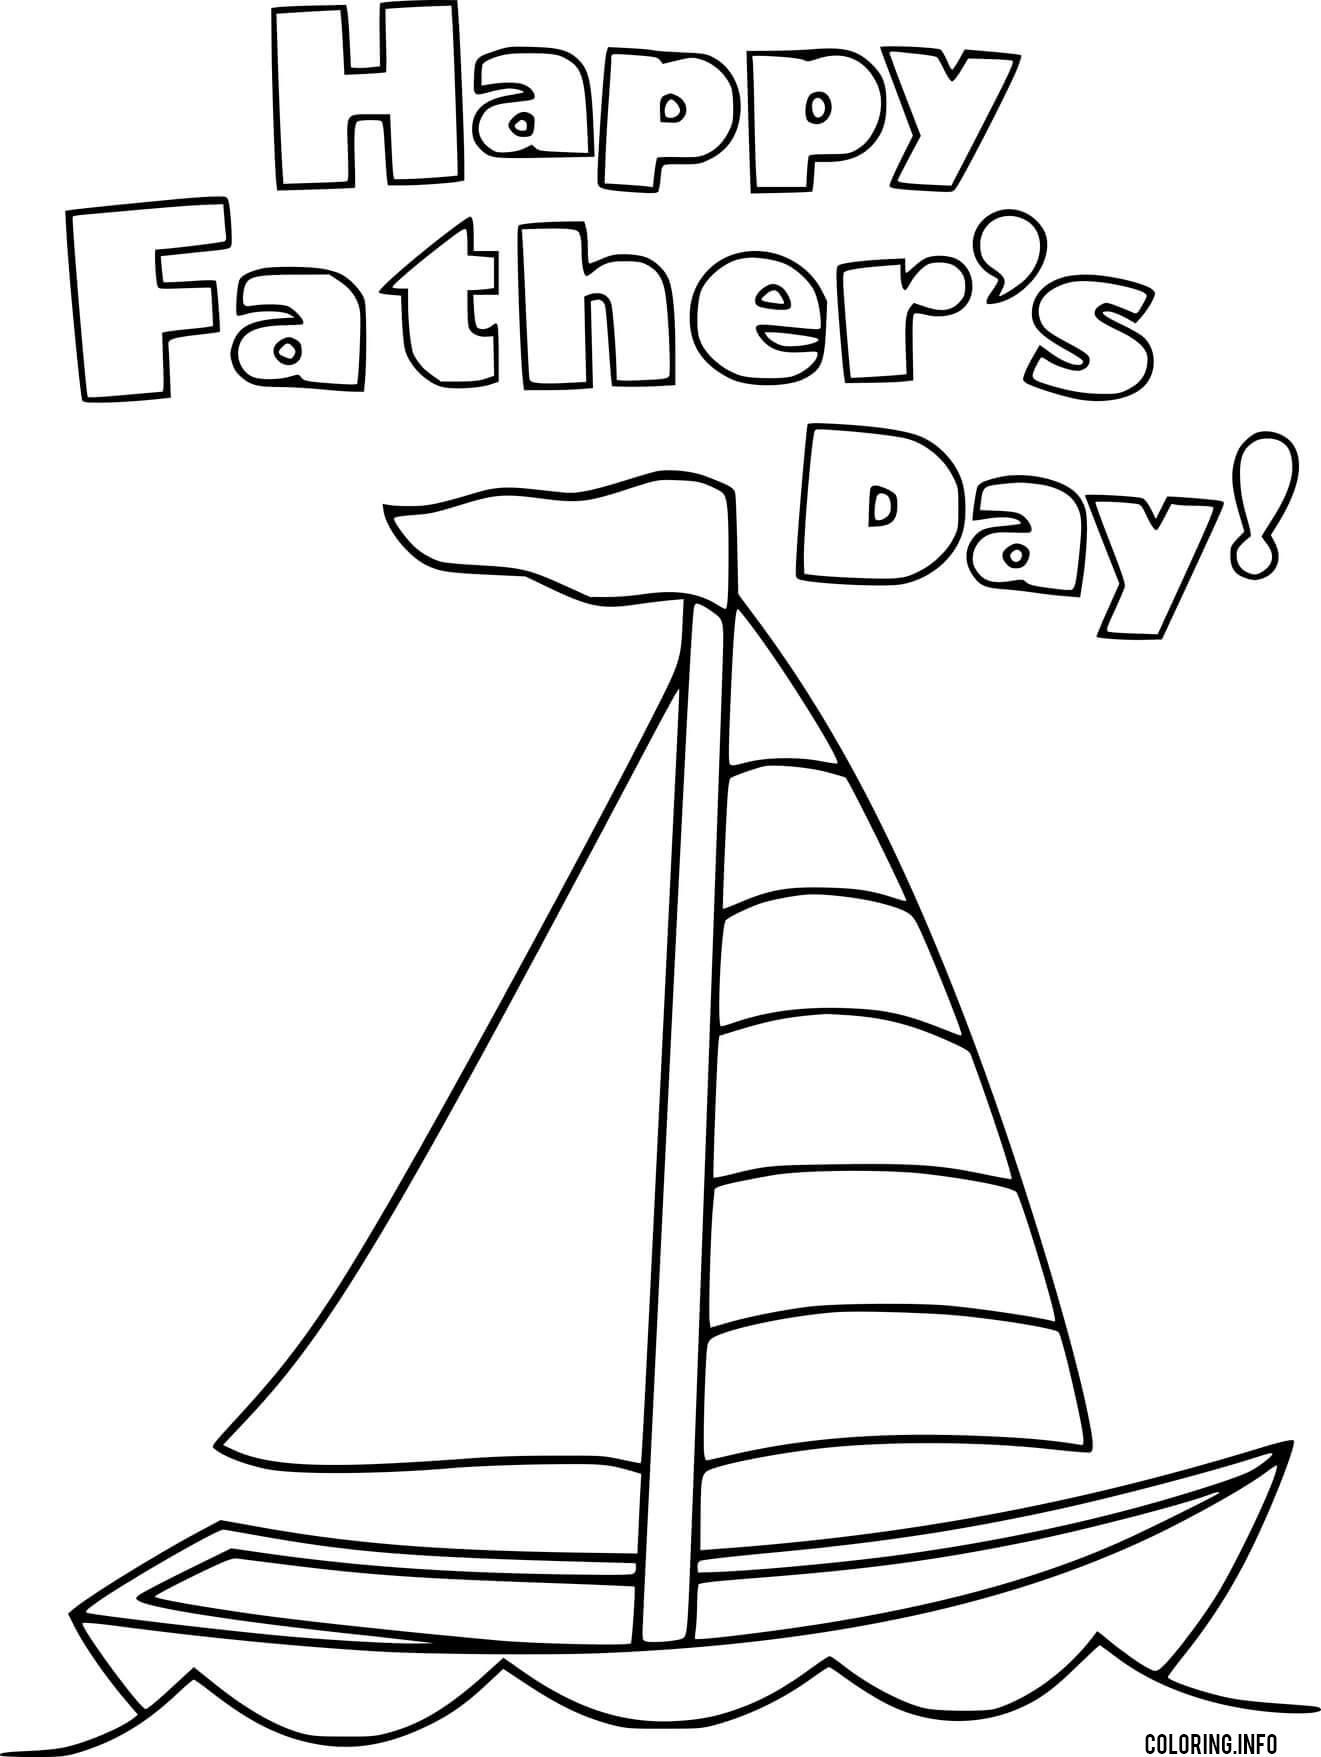 Happy Fathers Day And A Sailboat coloring